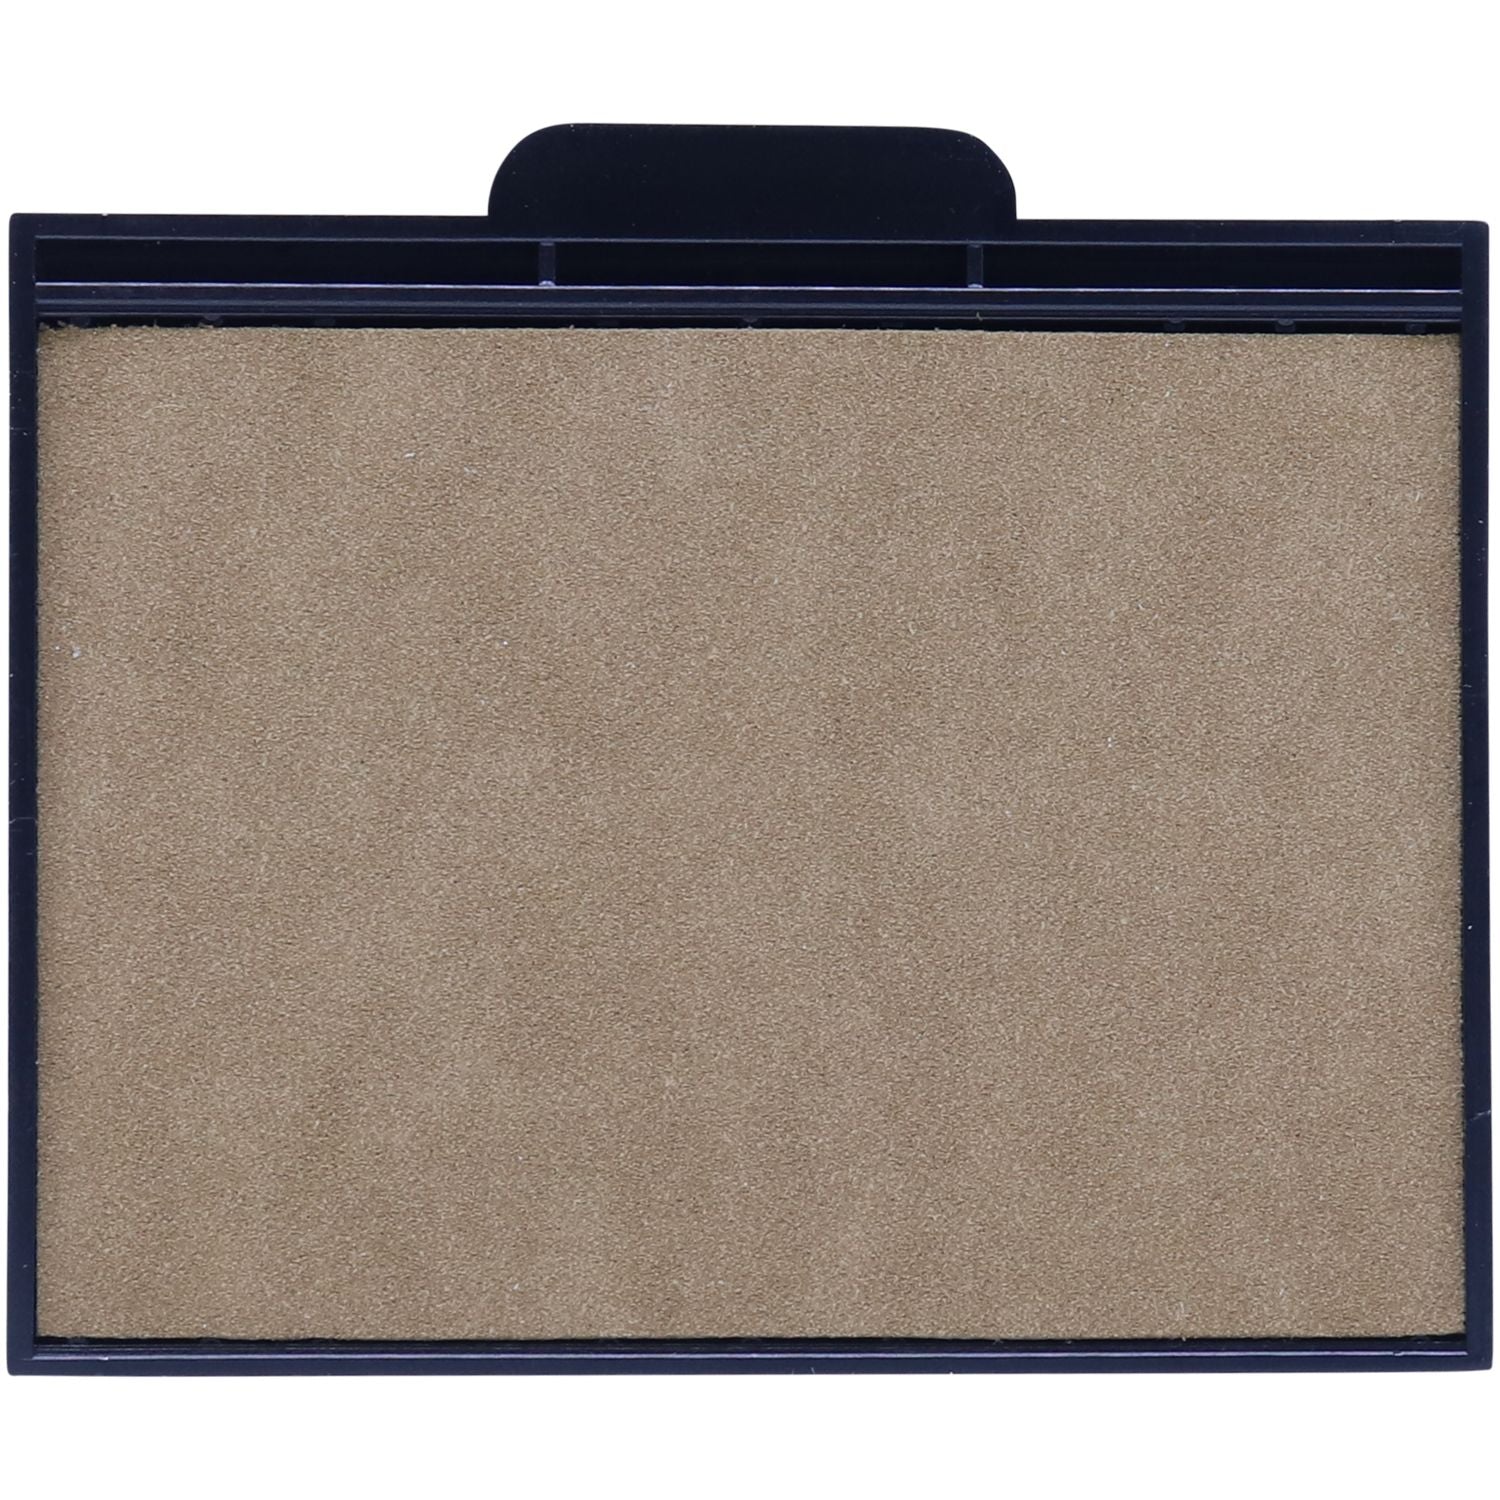 Two Color Replacement Ink Pad for HM-6100 Stamp